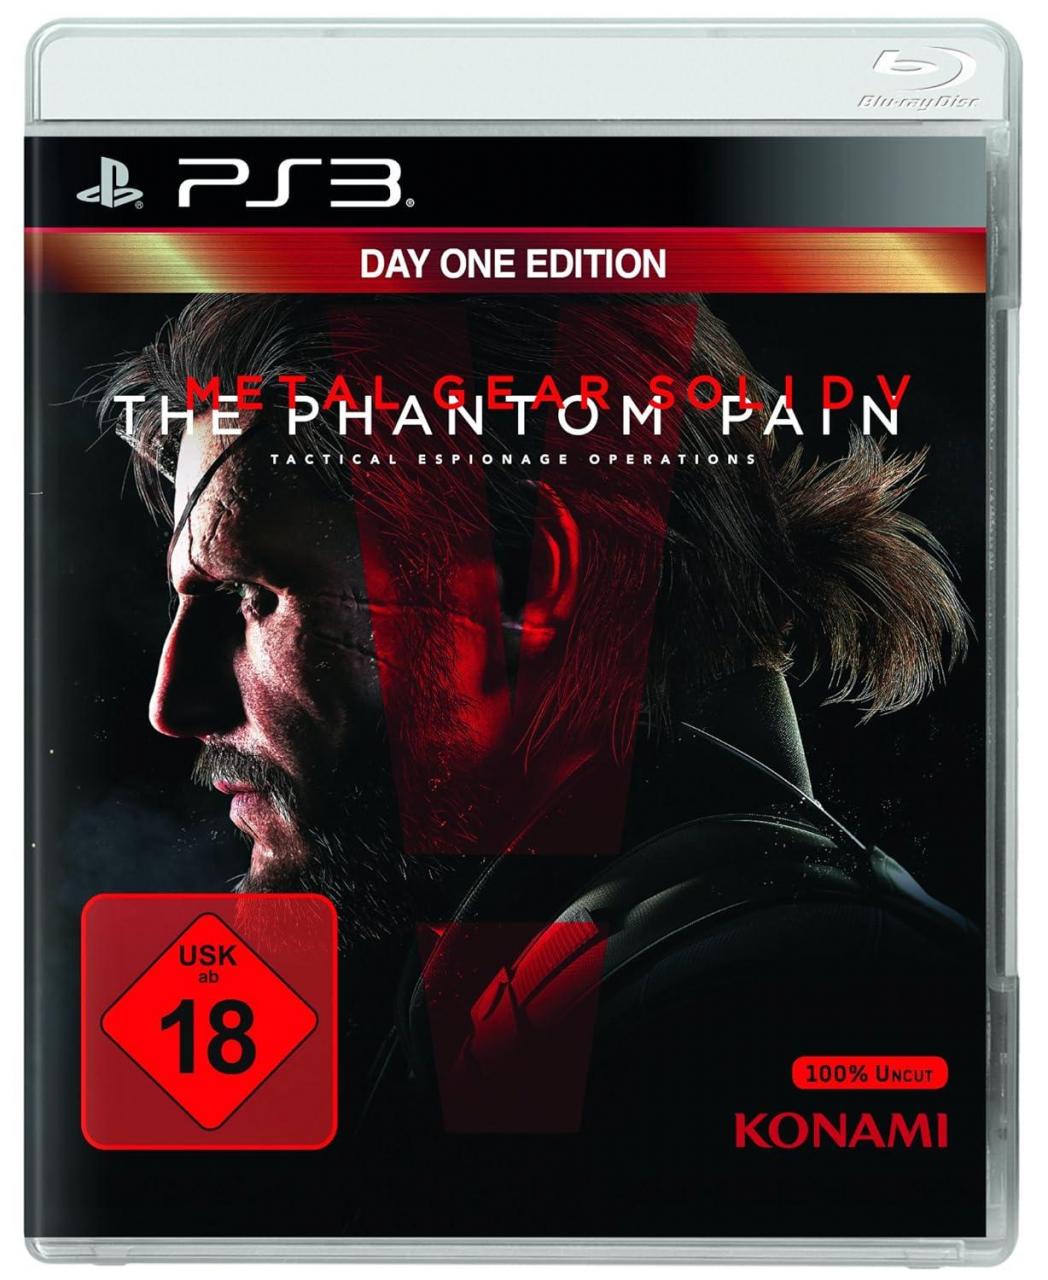 Metal Gear Solid V: The Phantom Pain - Day One Edition (Playstation 3, gebraucht) **